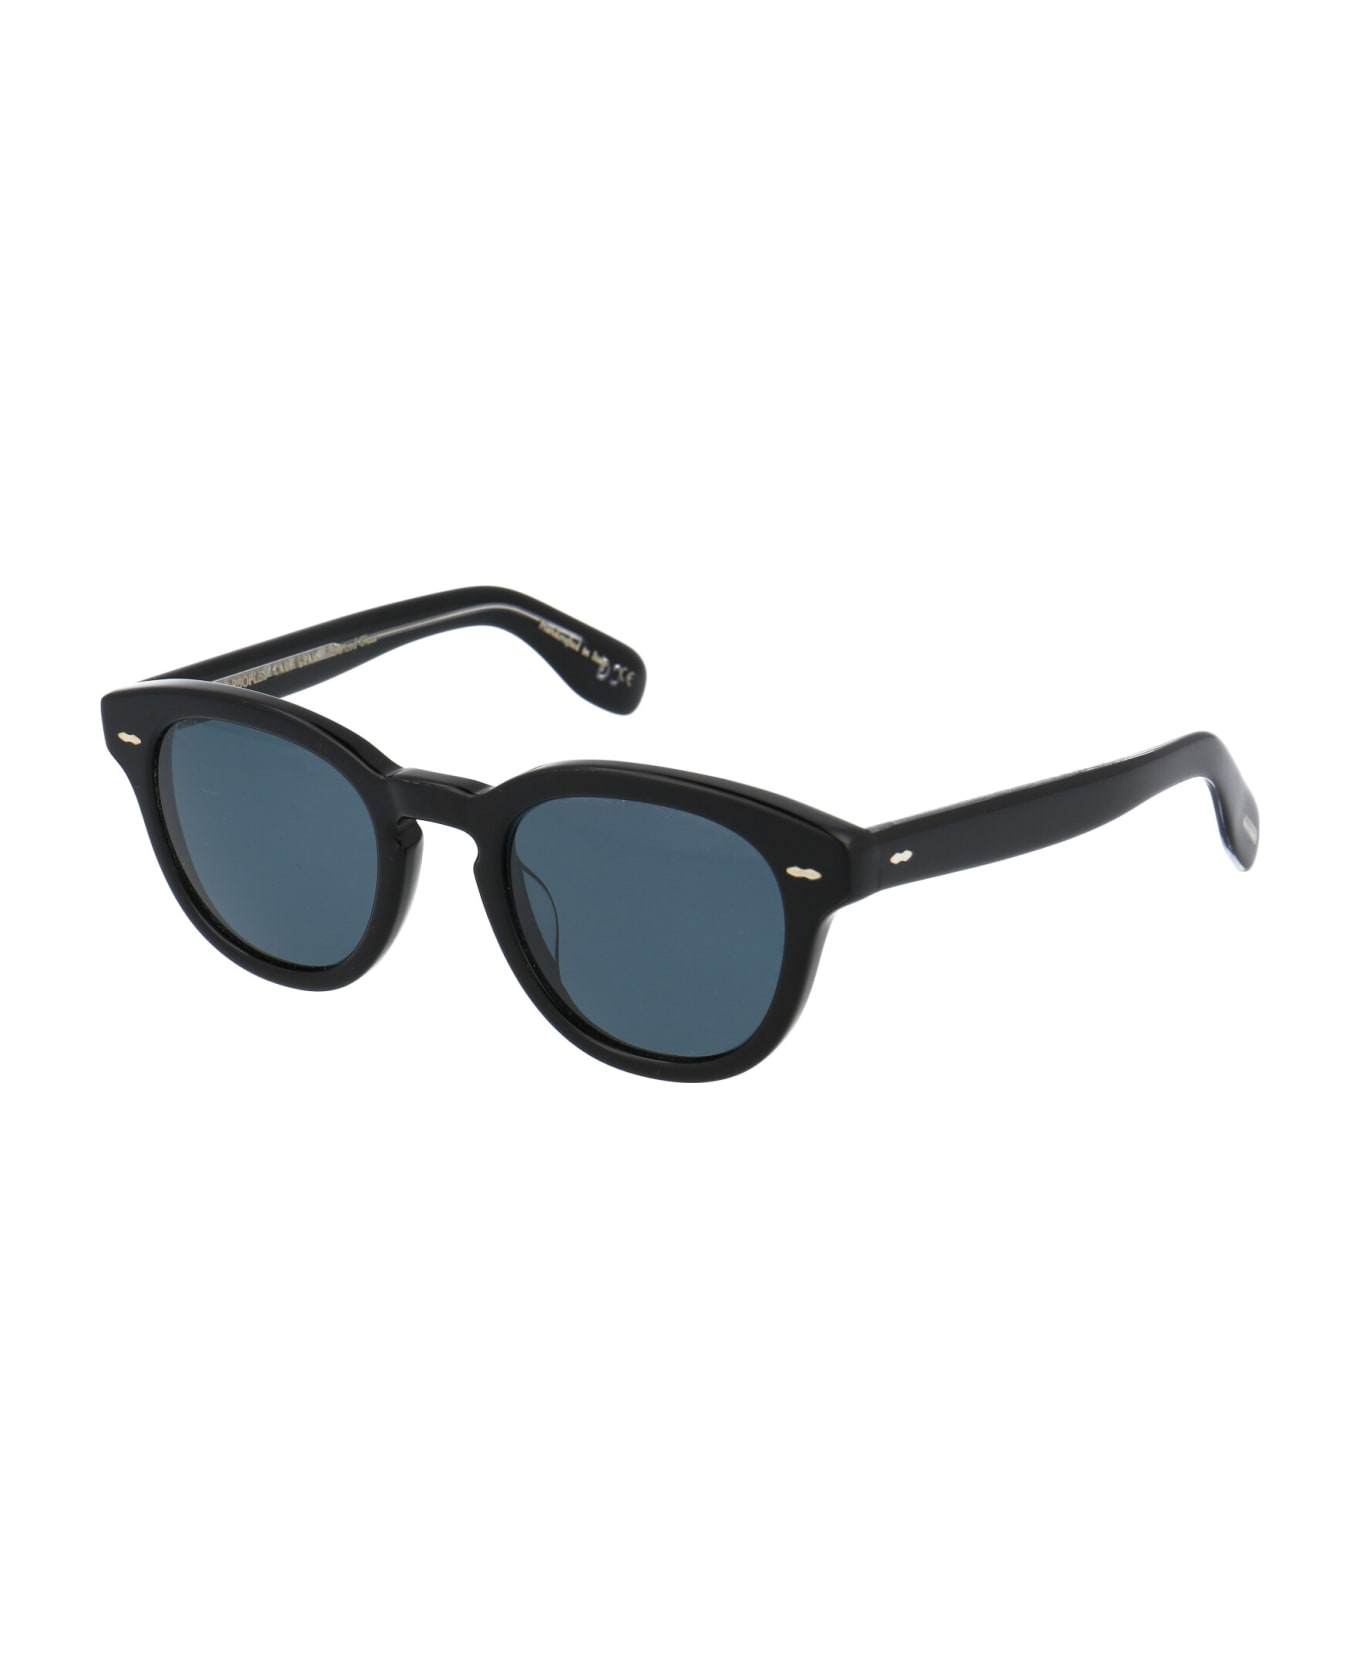 Oliver Peoples Cary Grant Sun Sunglasses - 14923R BLACK